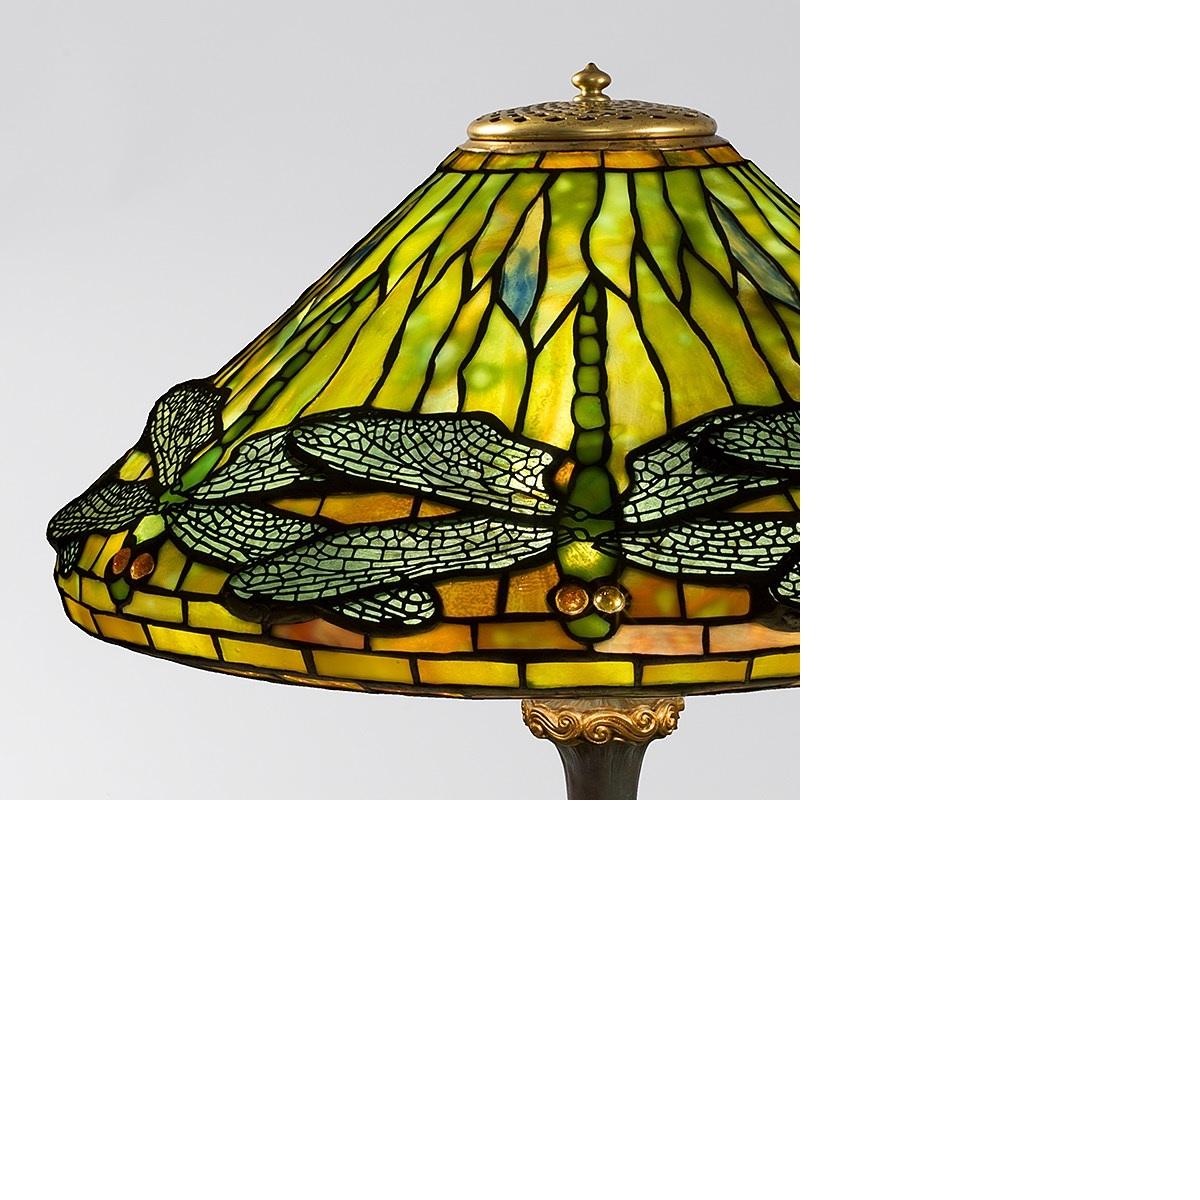 A Tiffany Studios New York leaded glass and patinated bronze 